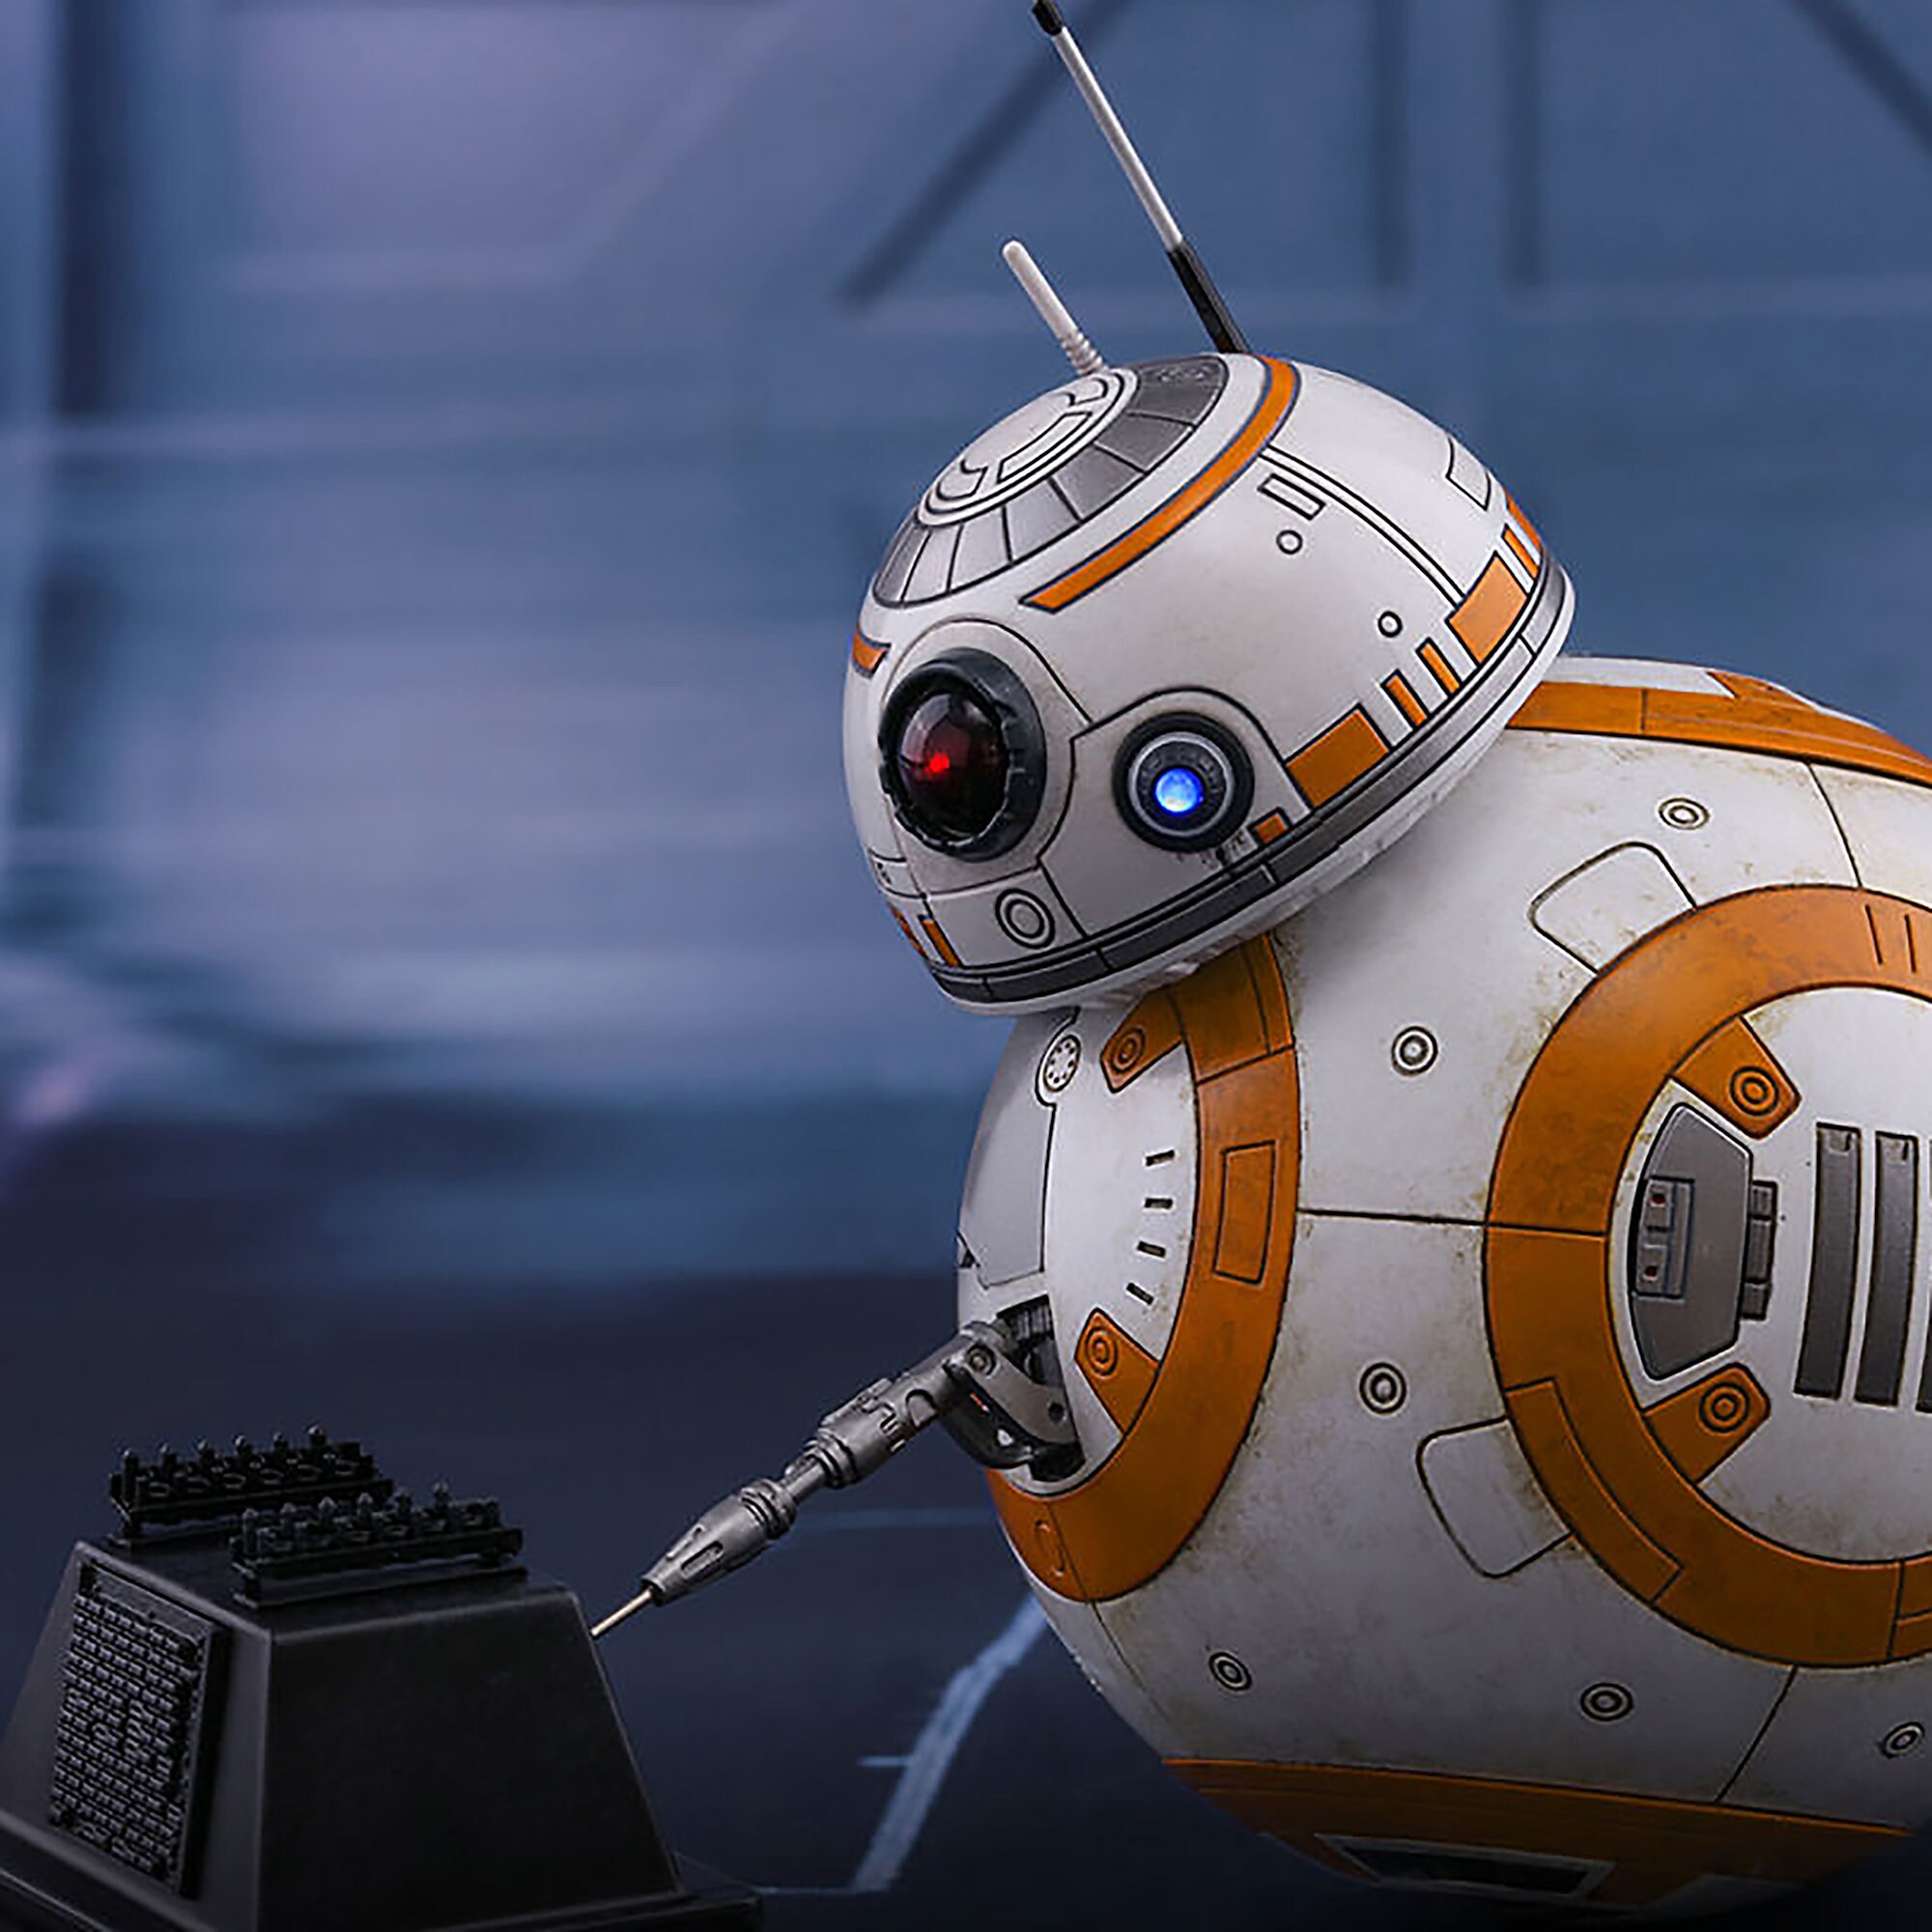 BB-8 and BB-9E Sixth Scale Figure Set by Hot Toys - Star Wars